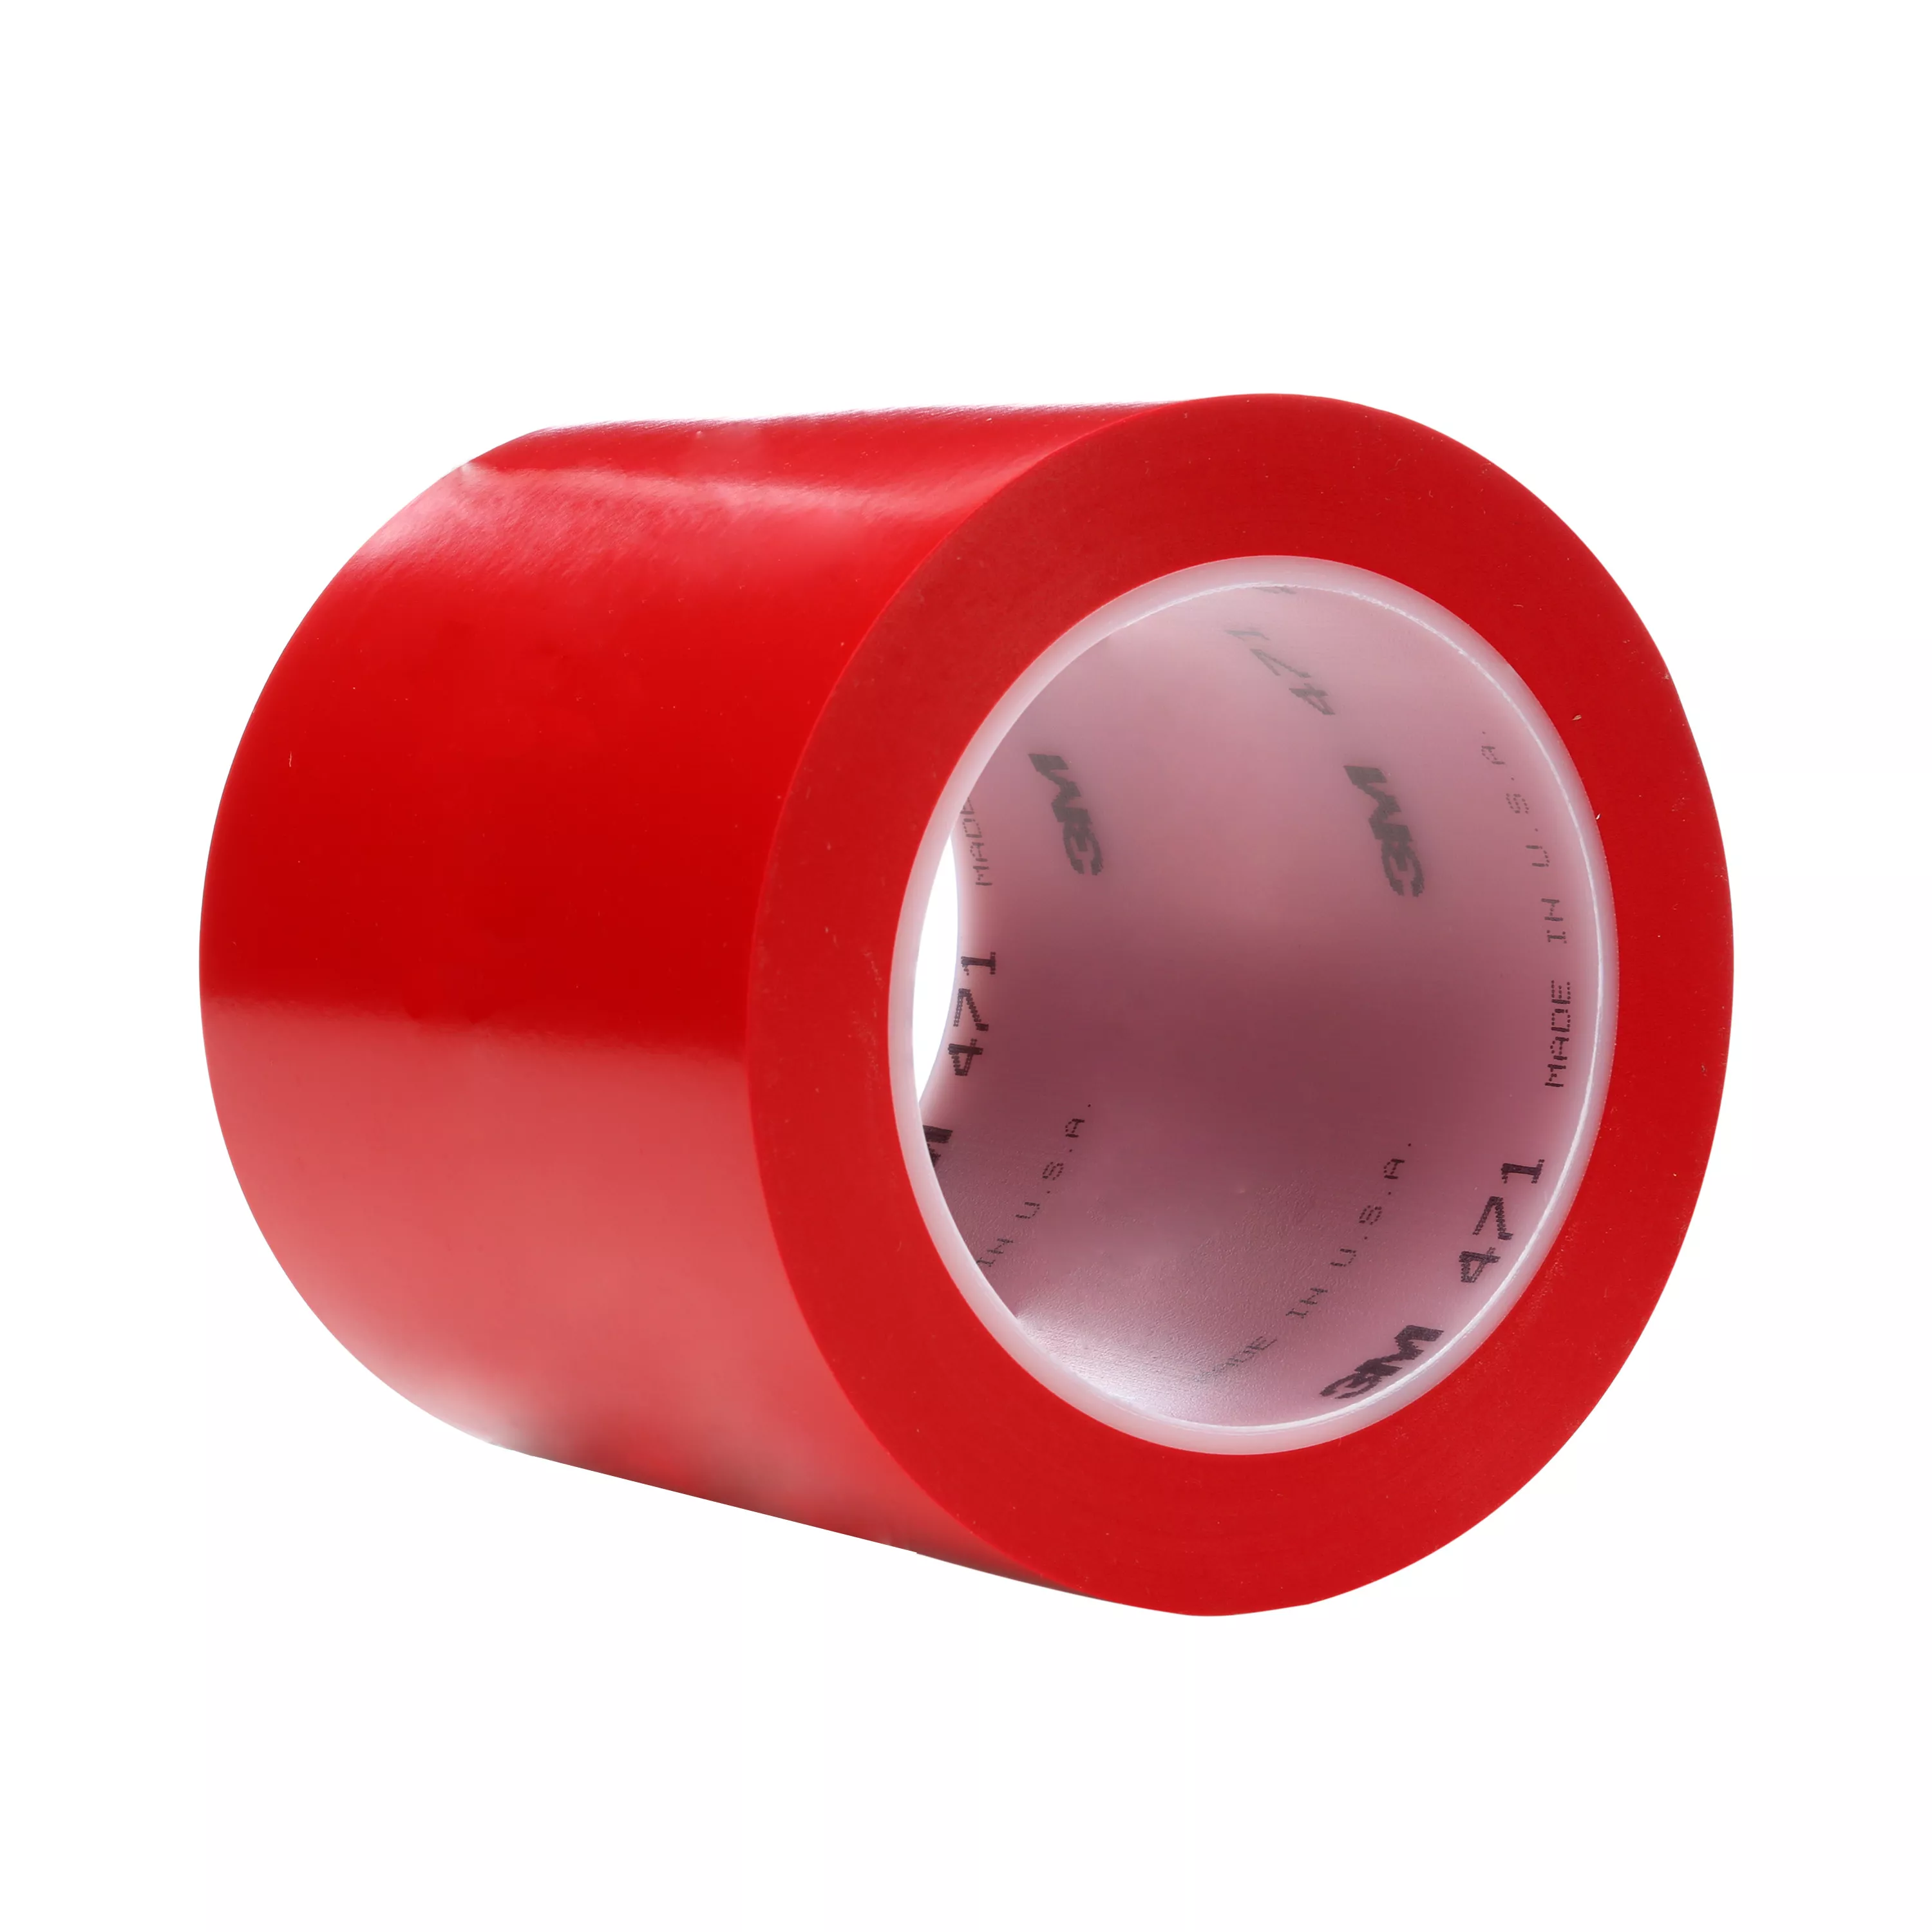 3M™ Vinyl Tape 471, Red, 4 in x 36 yd, 5.2 mil, 8 Roll/Case,
Individually Wrapped Conveniently Packaged